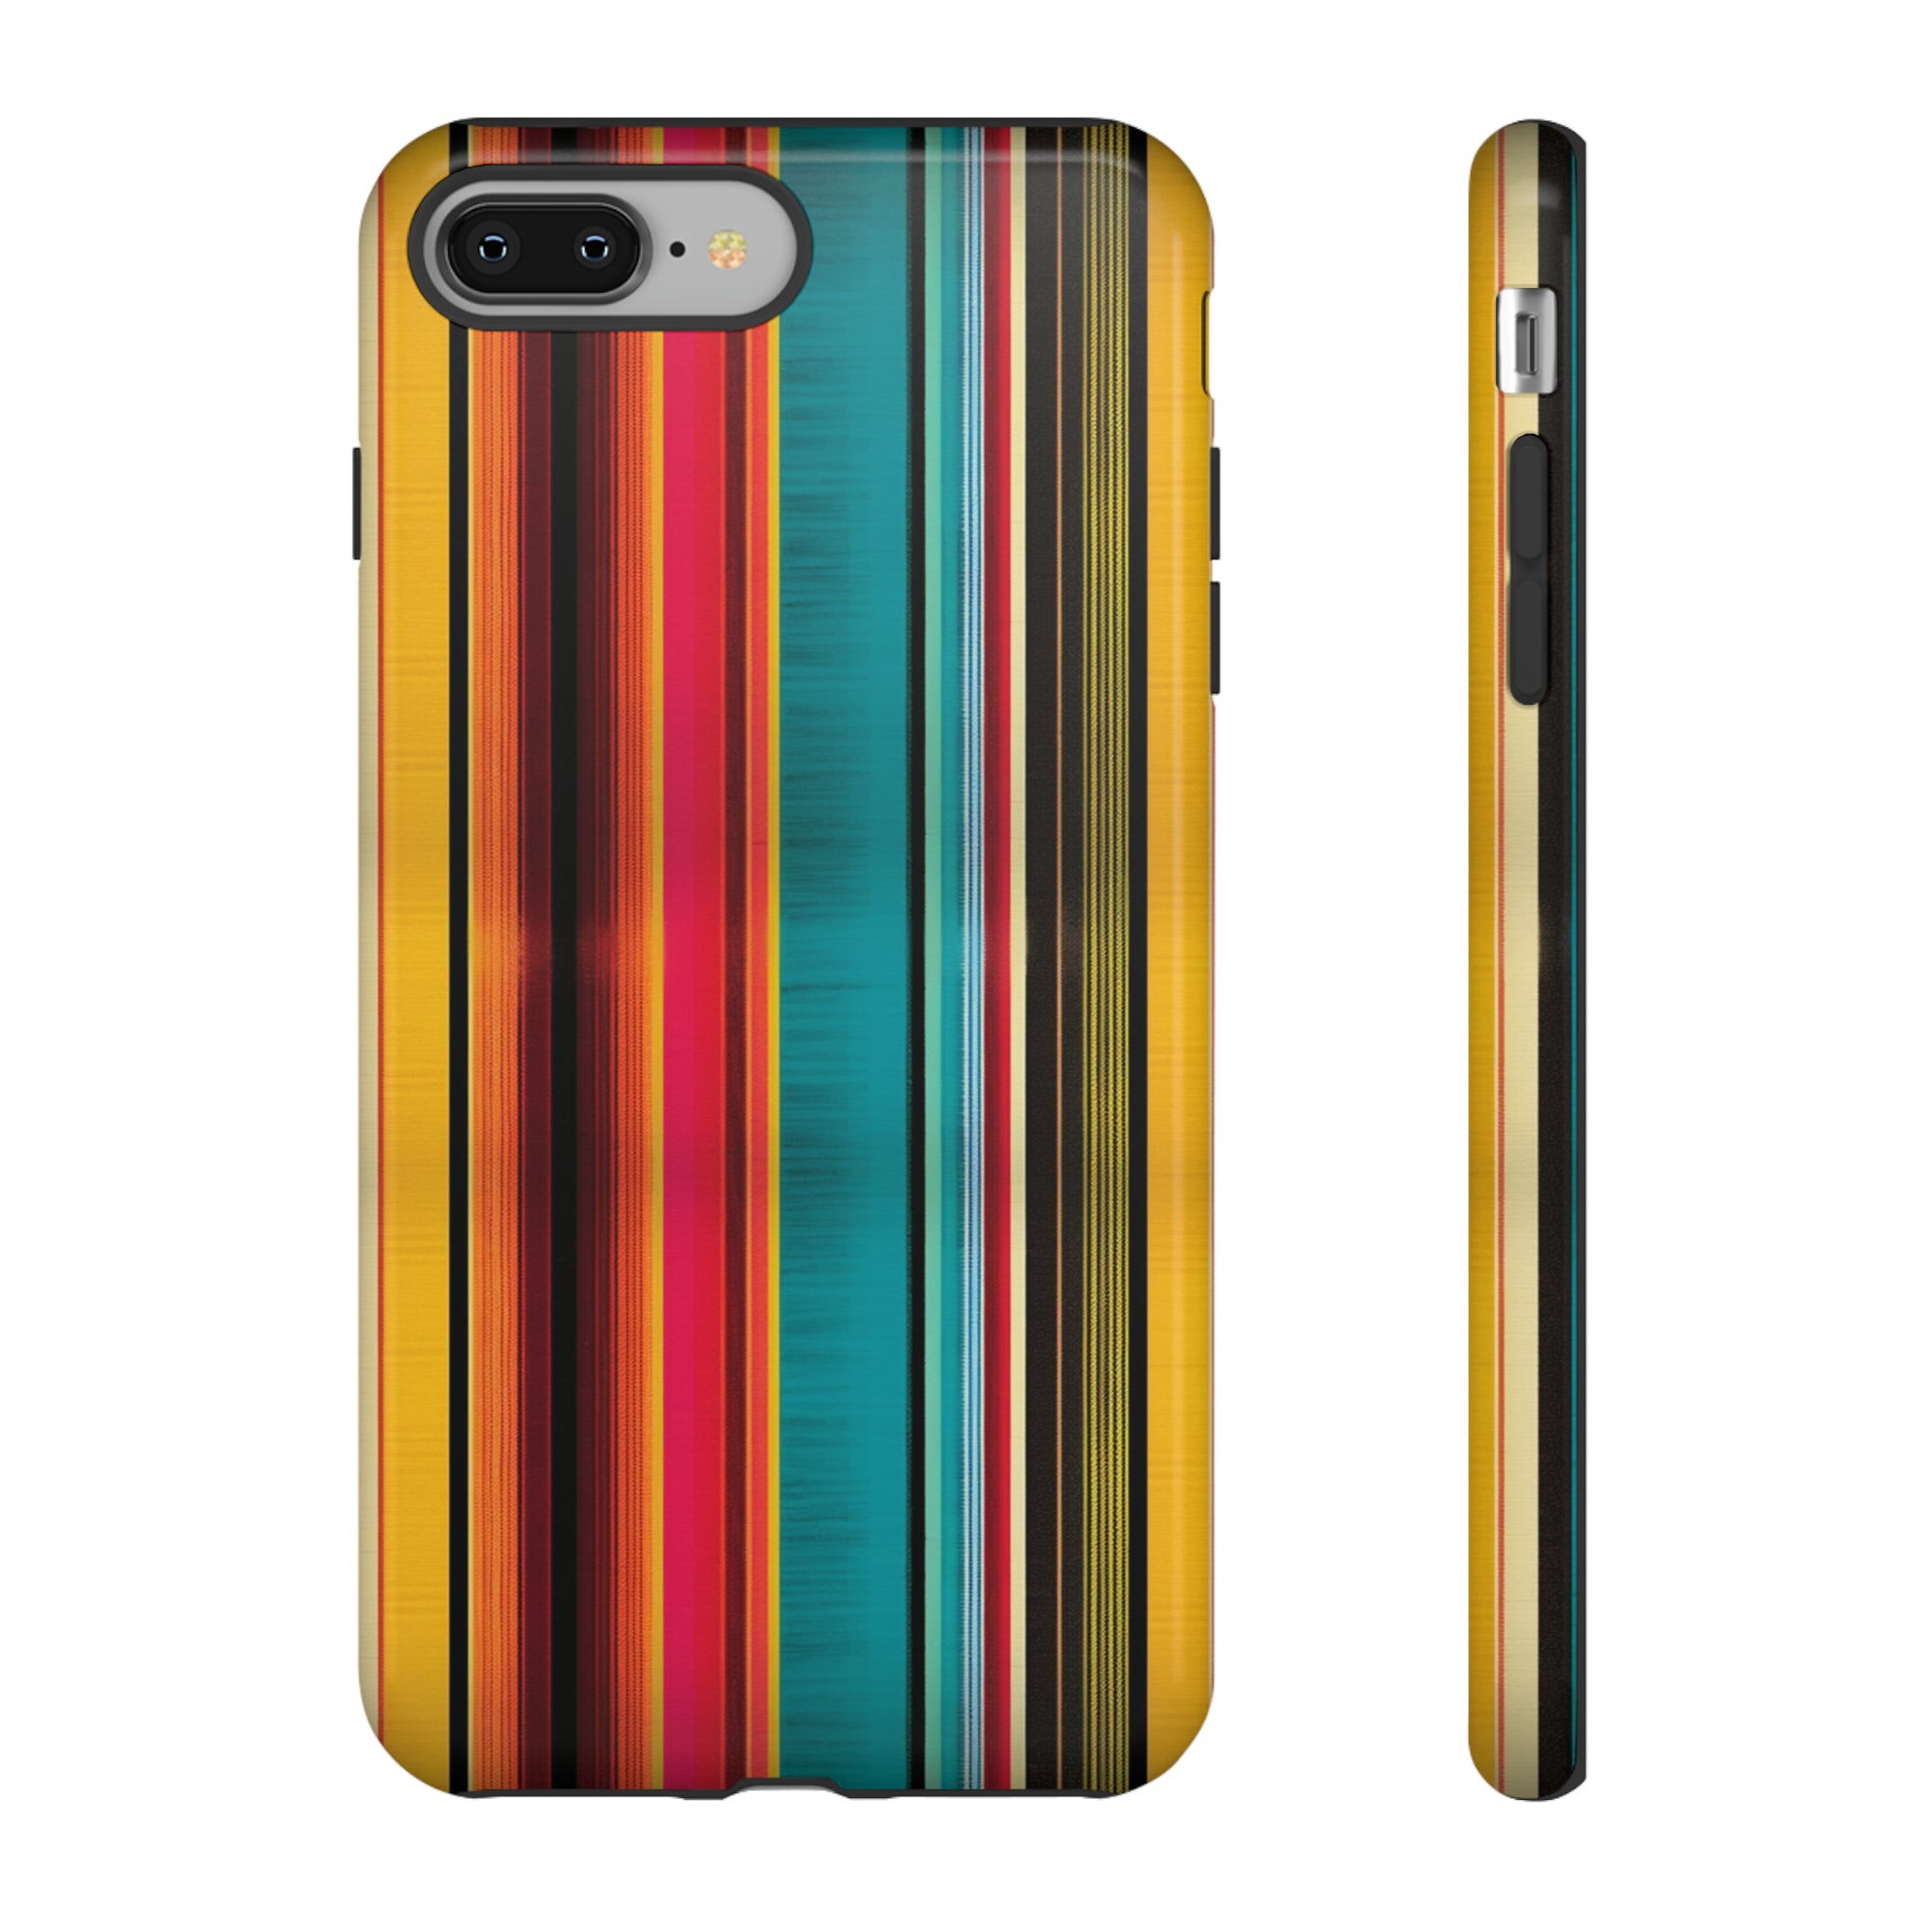 Artistic and durable case reflecting Native American heritage